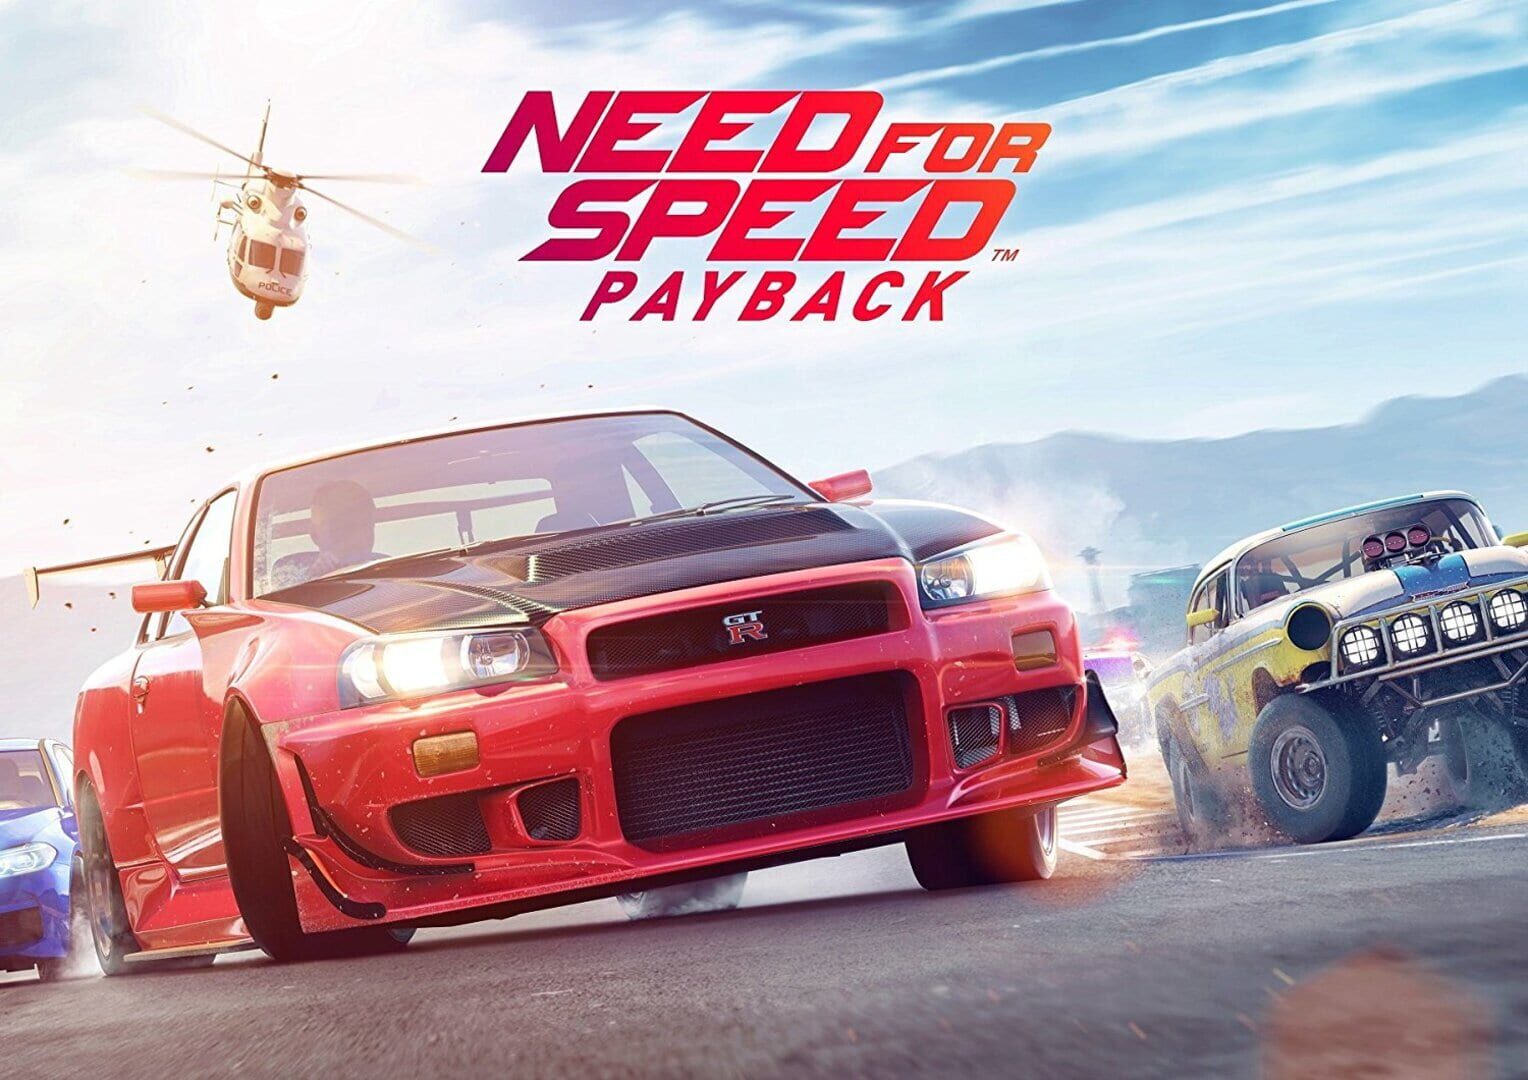 Artwork for Need for Speed: Payback